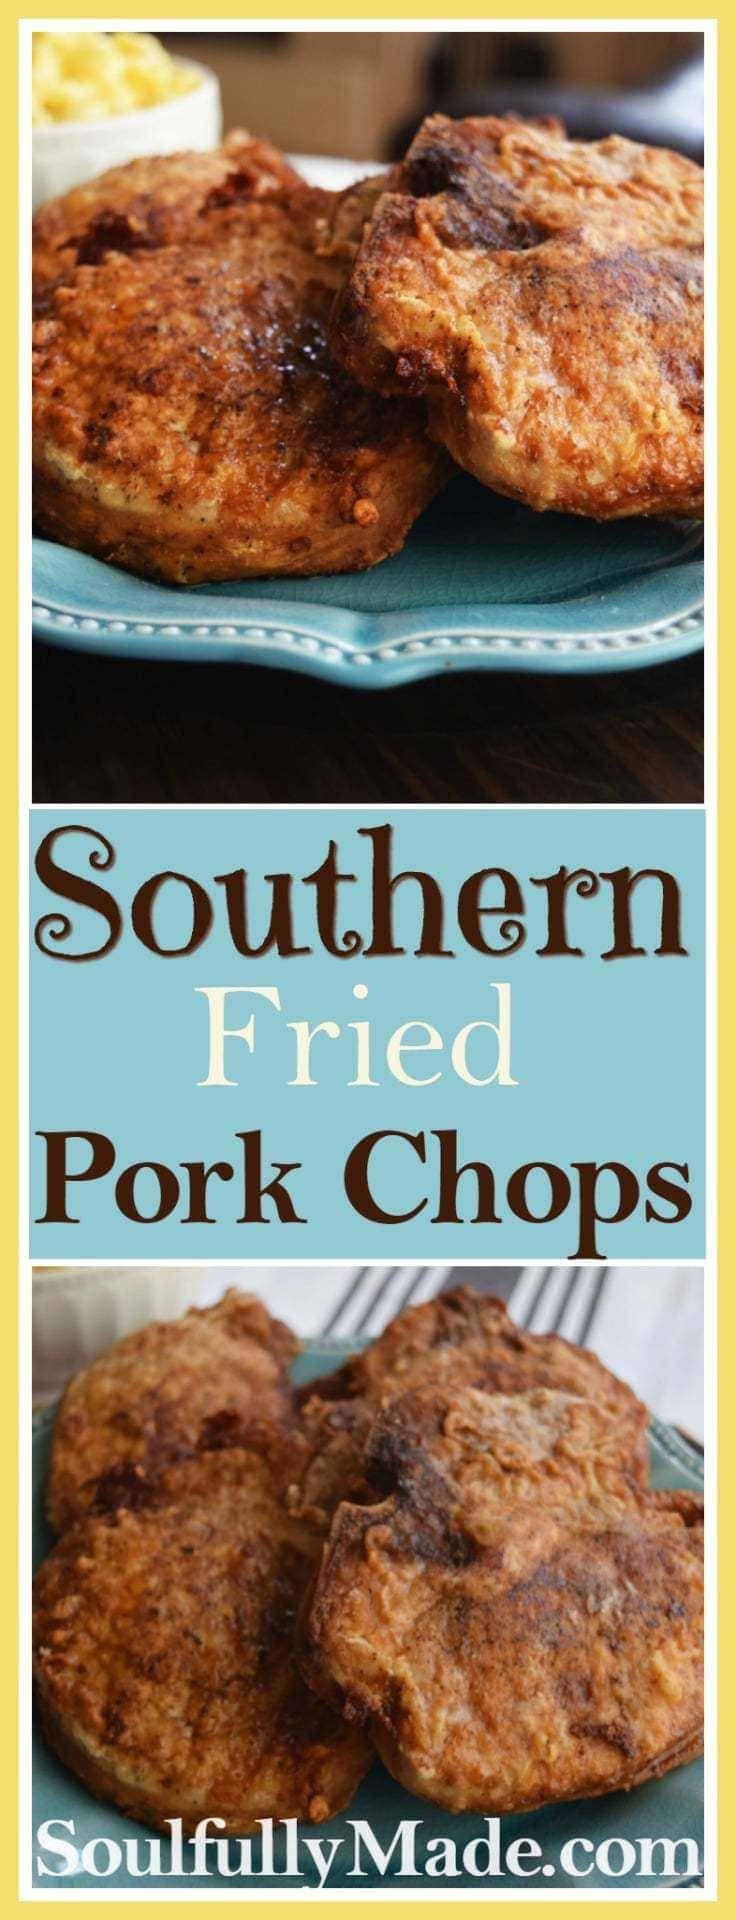 Southern Fried Pork Chops | Soulfully Made